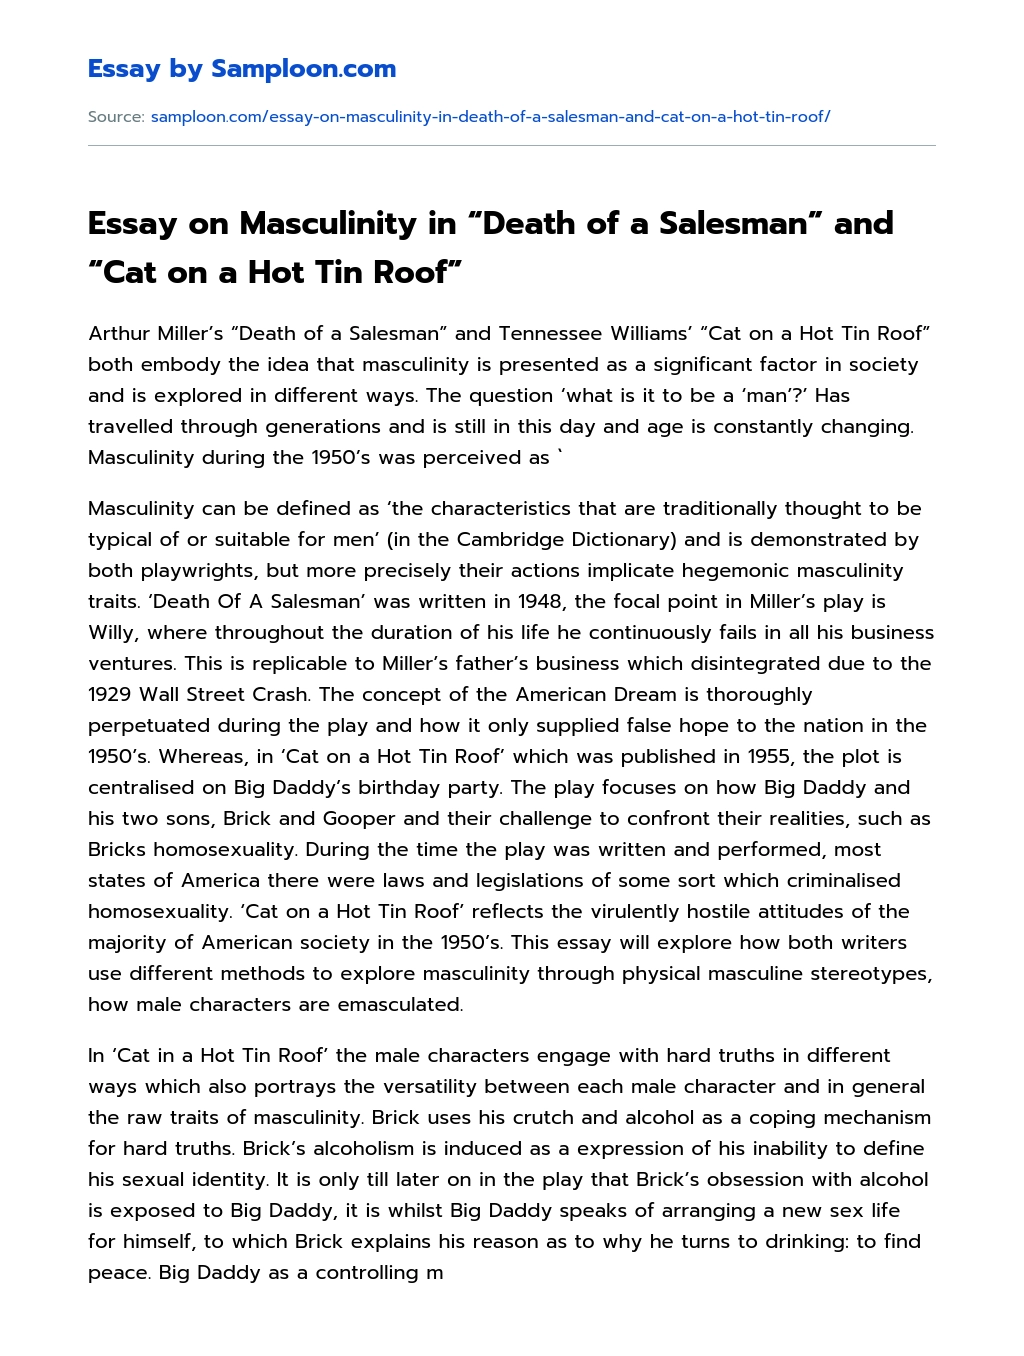 Essay on Masculinity in “Death of a Salesman” and “Cat on a Hot Tin Roof” essay